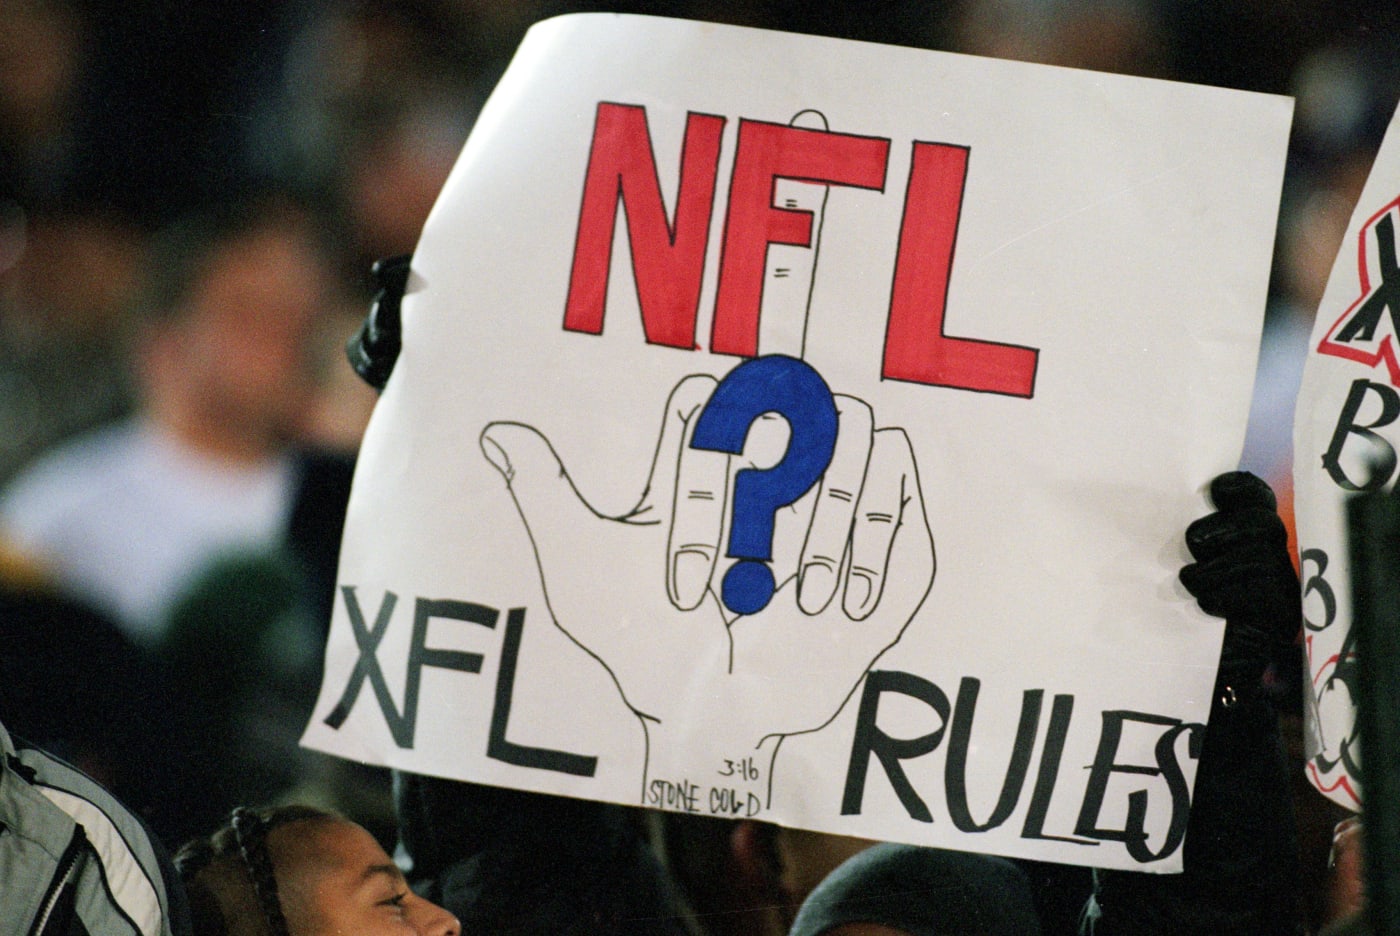 NFL XFL Rules Poster 2001